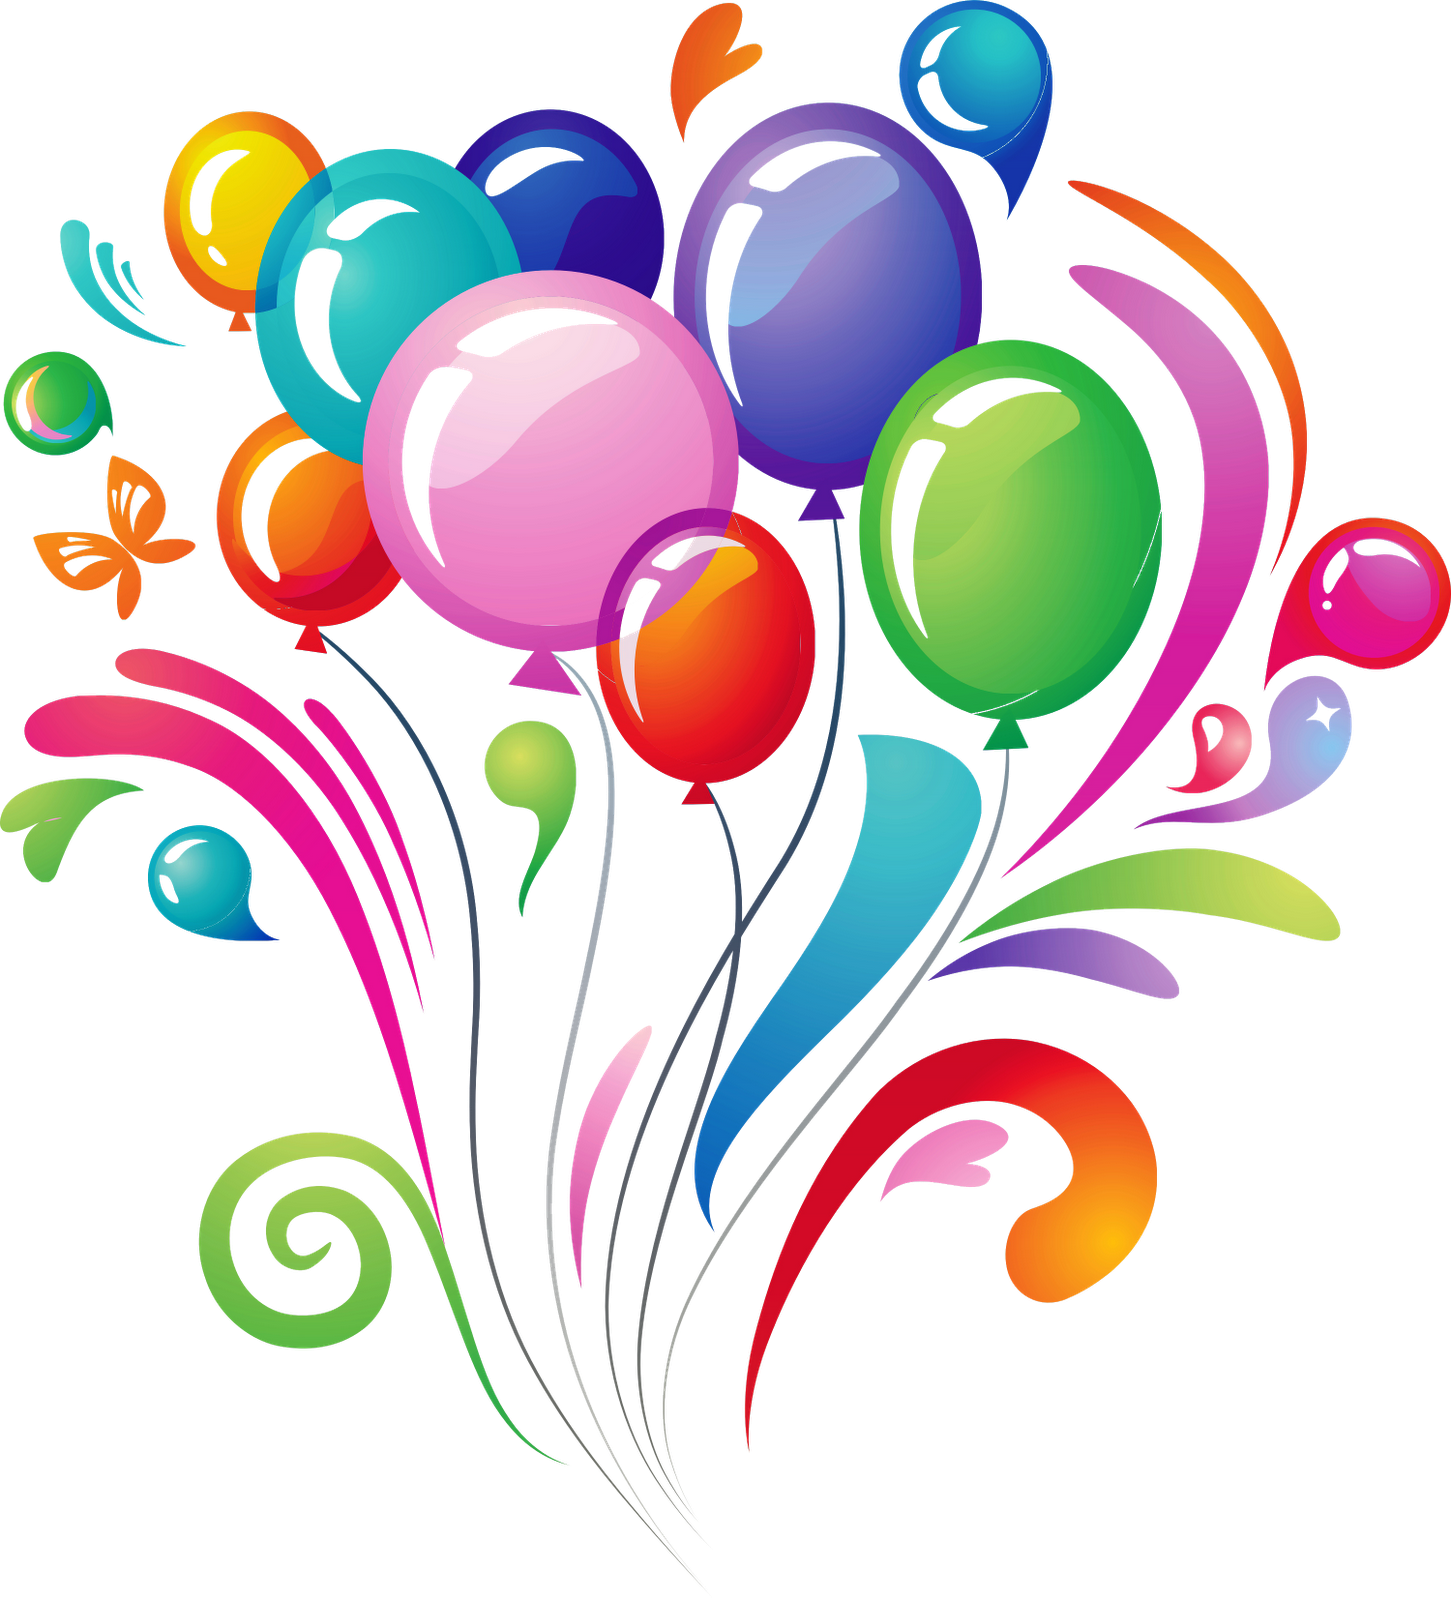 Balloons Transparent PNG Image